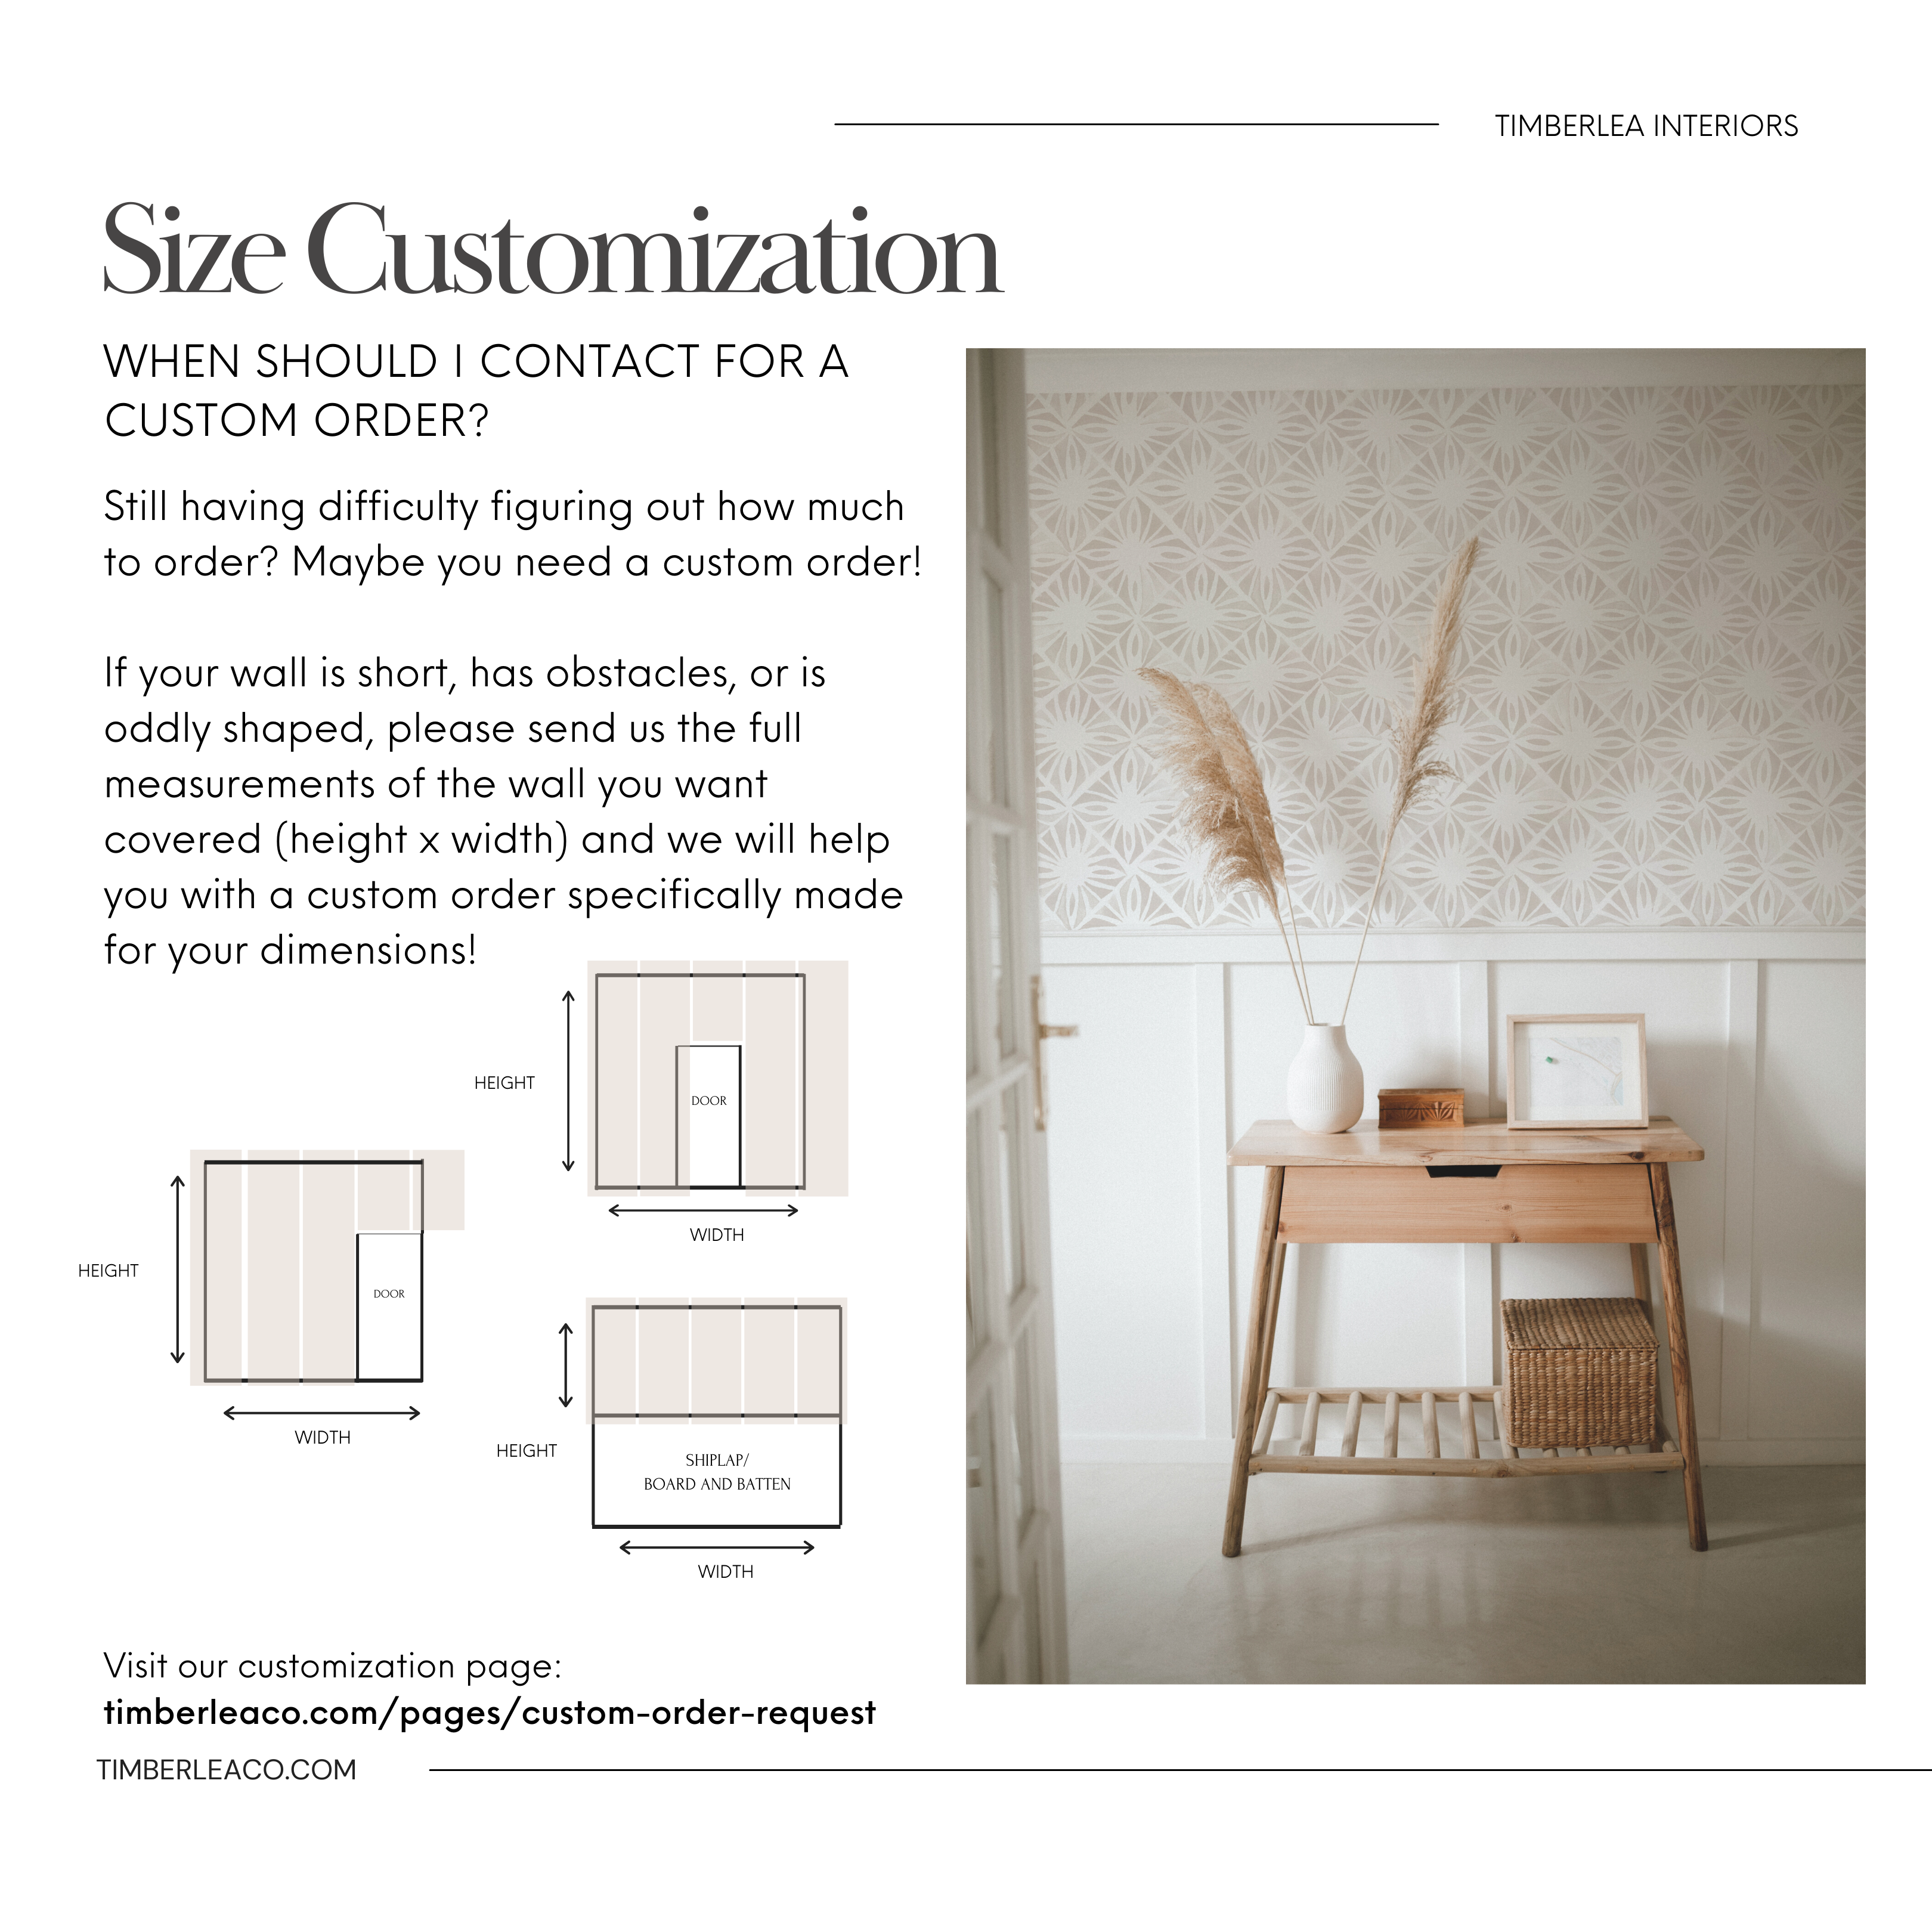 Alt text: A promotional graphic by Timberlea Interiors titled 'Size Customization' advising on how to order custom-sized wallpaper. It includes an elegantly furnished space with the wallpaper, text explaining the custom order process for walls with unique dimensions, and diagrams illustrating how to measure wall space.